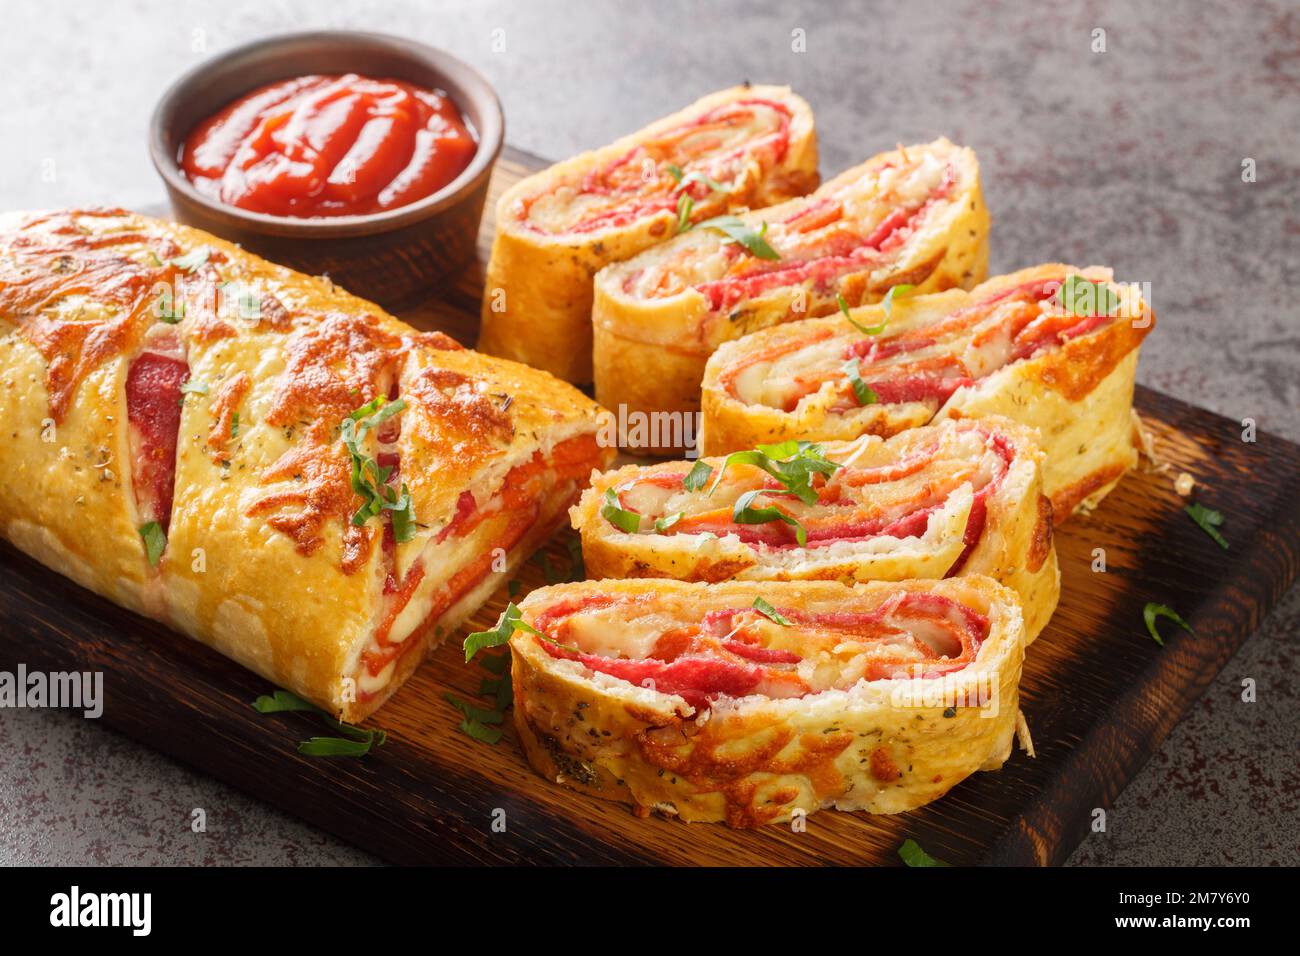 Delicious pizza stromboli roll stuffed with salami sausage and mozzarella cheese close-up on a wooden board on the table. horizontal Stock Photo